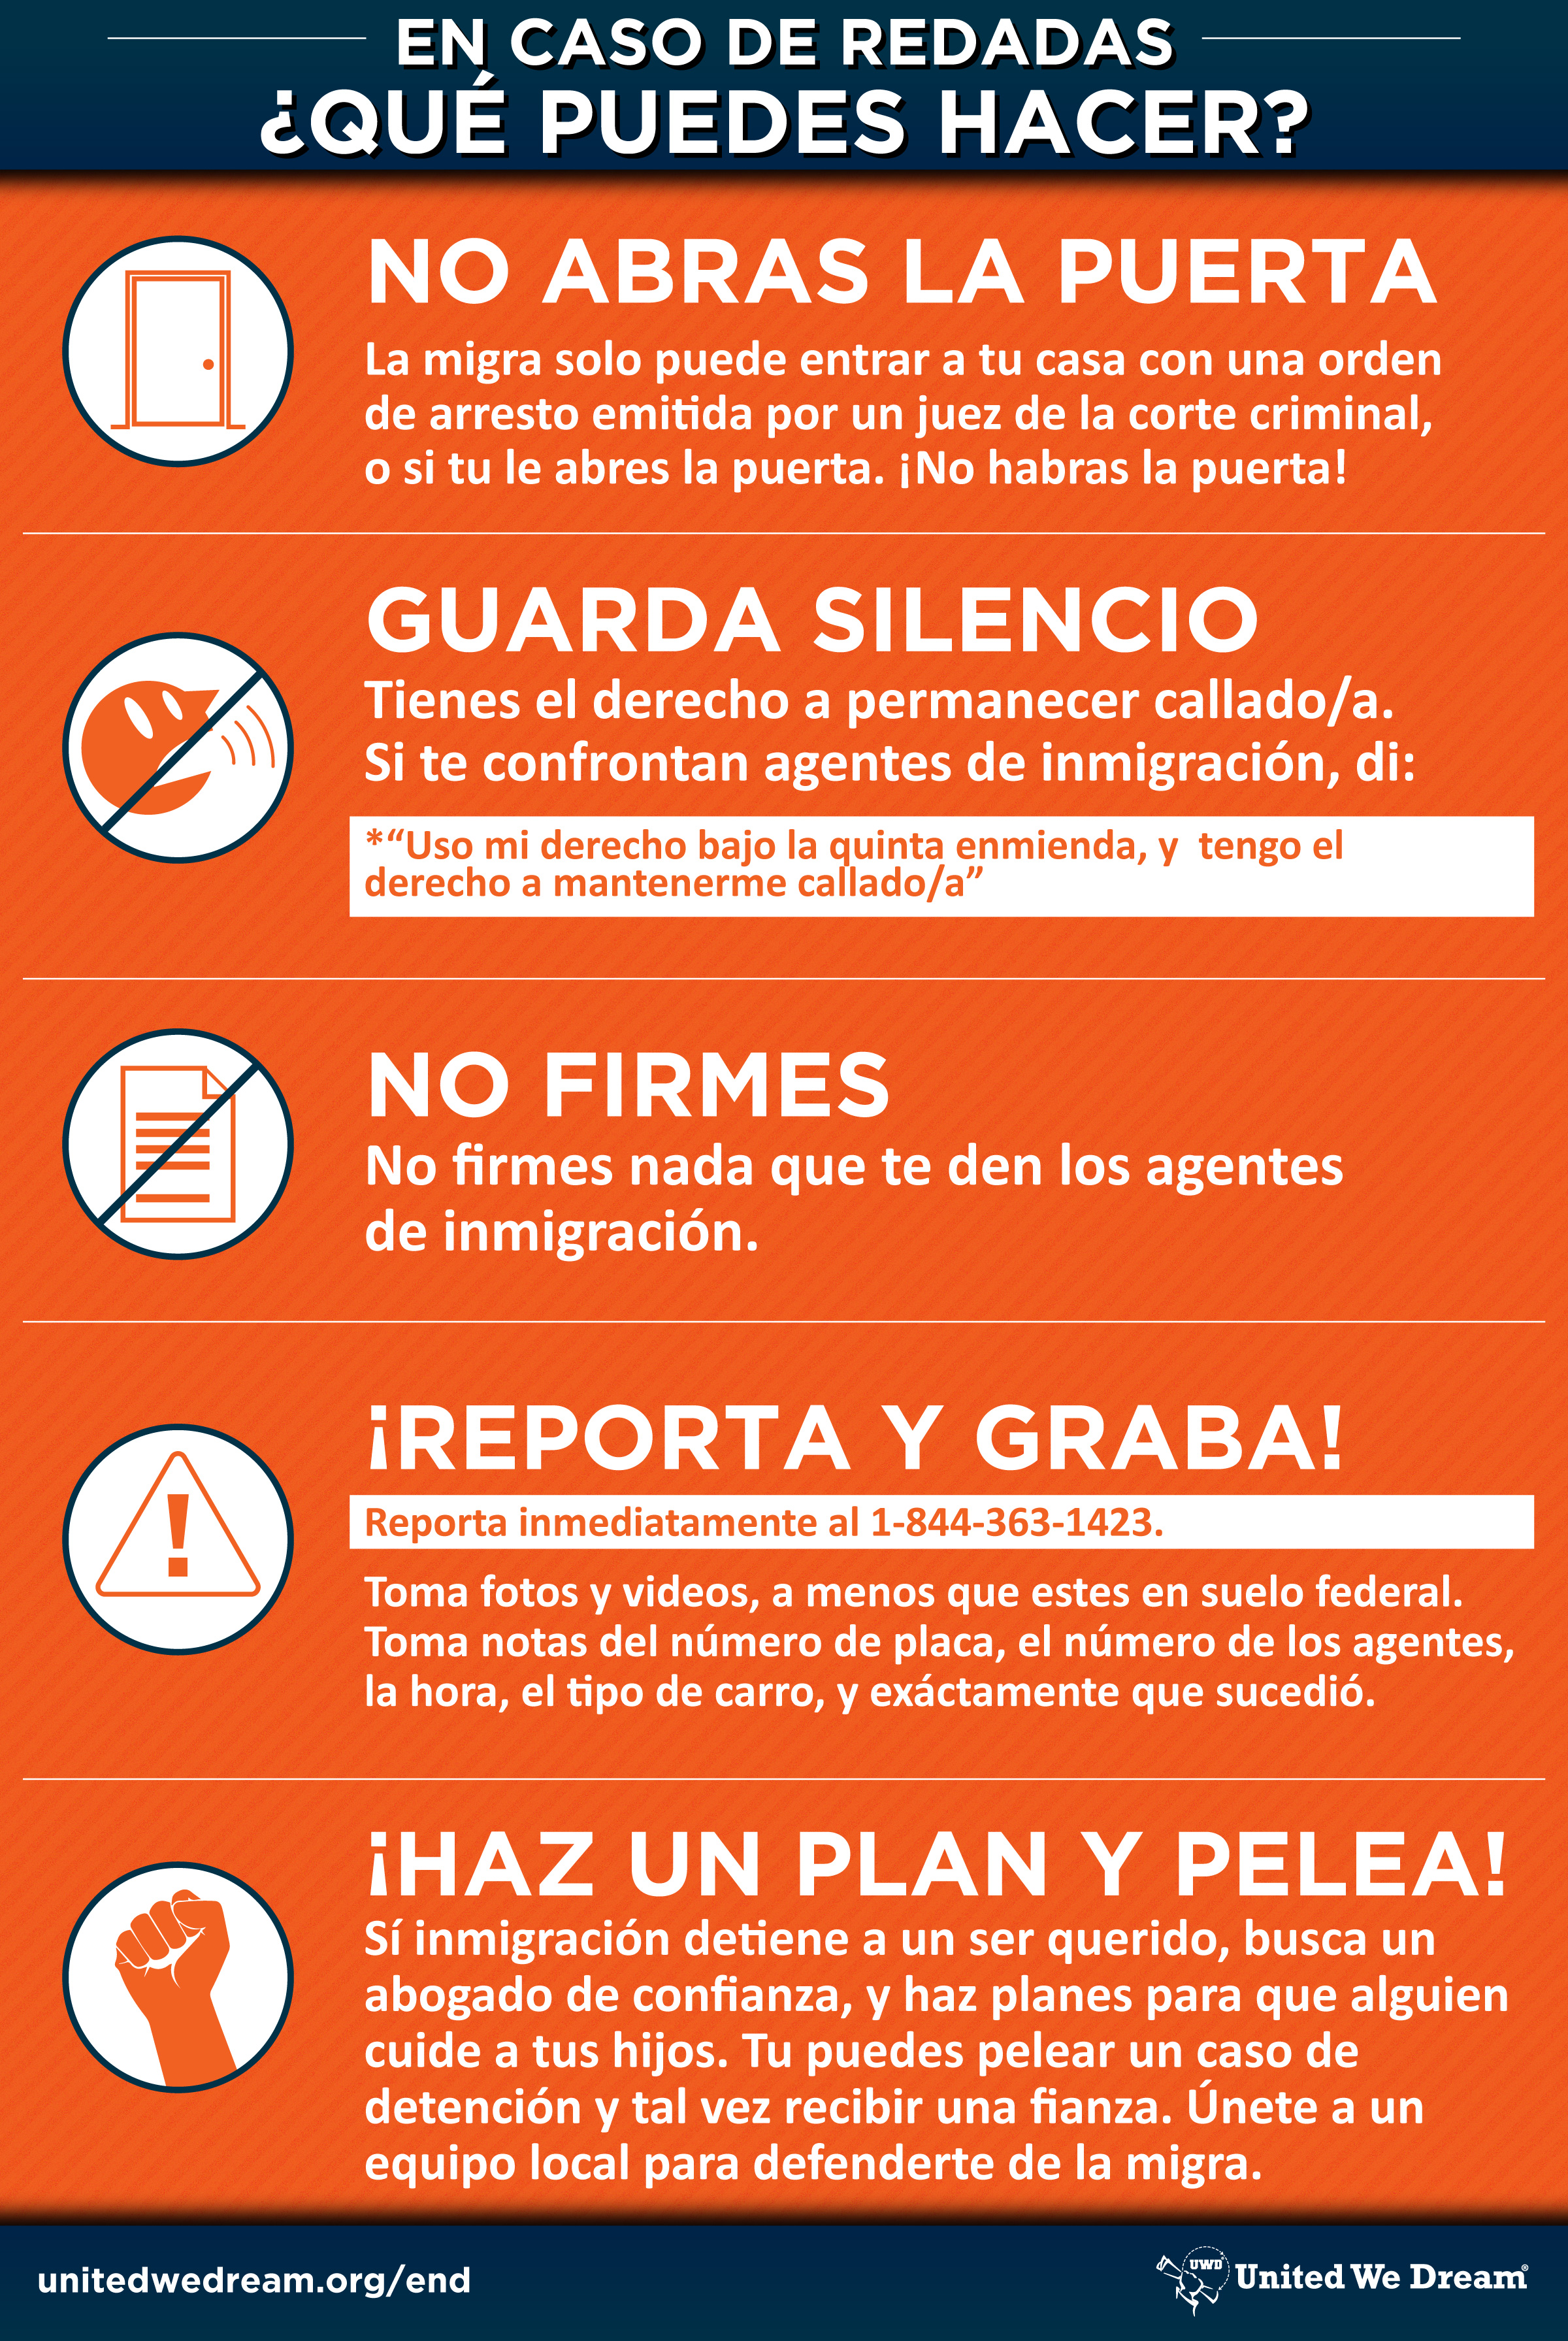 Know-Your-Rights-April2016espanol-3.jpg